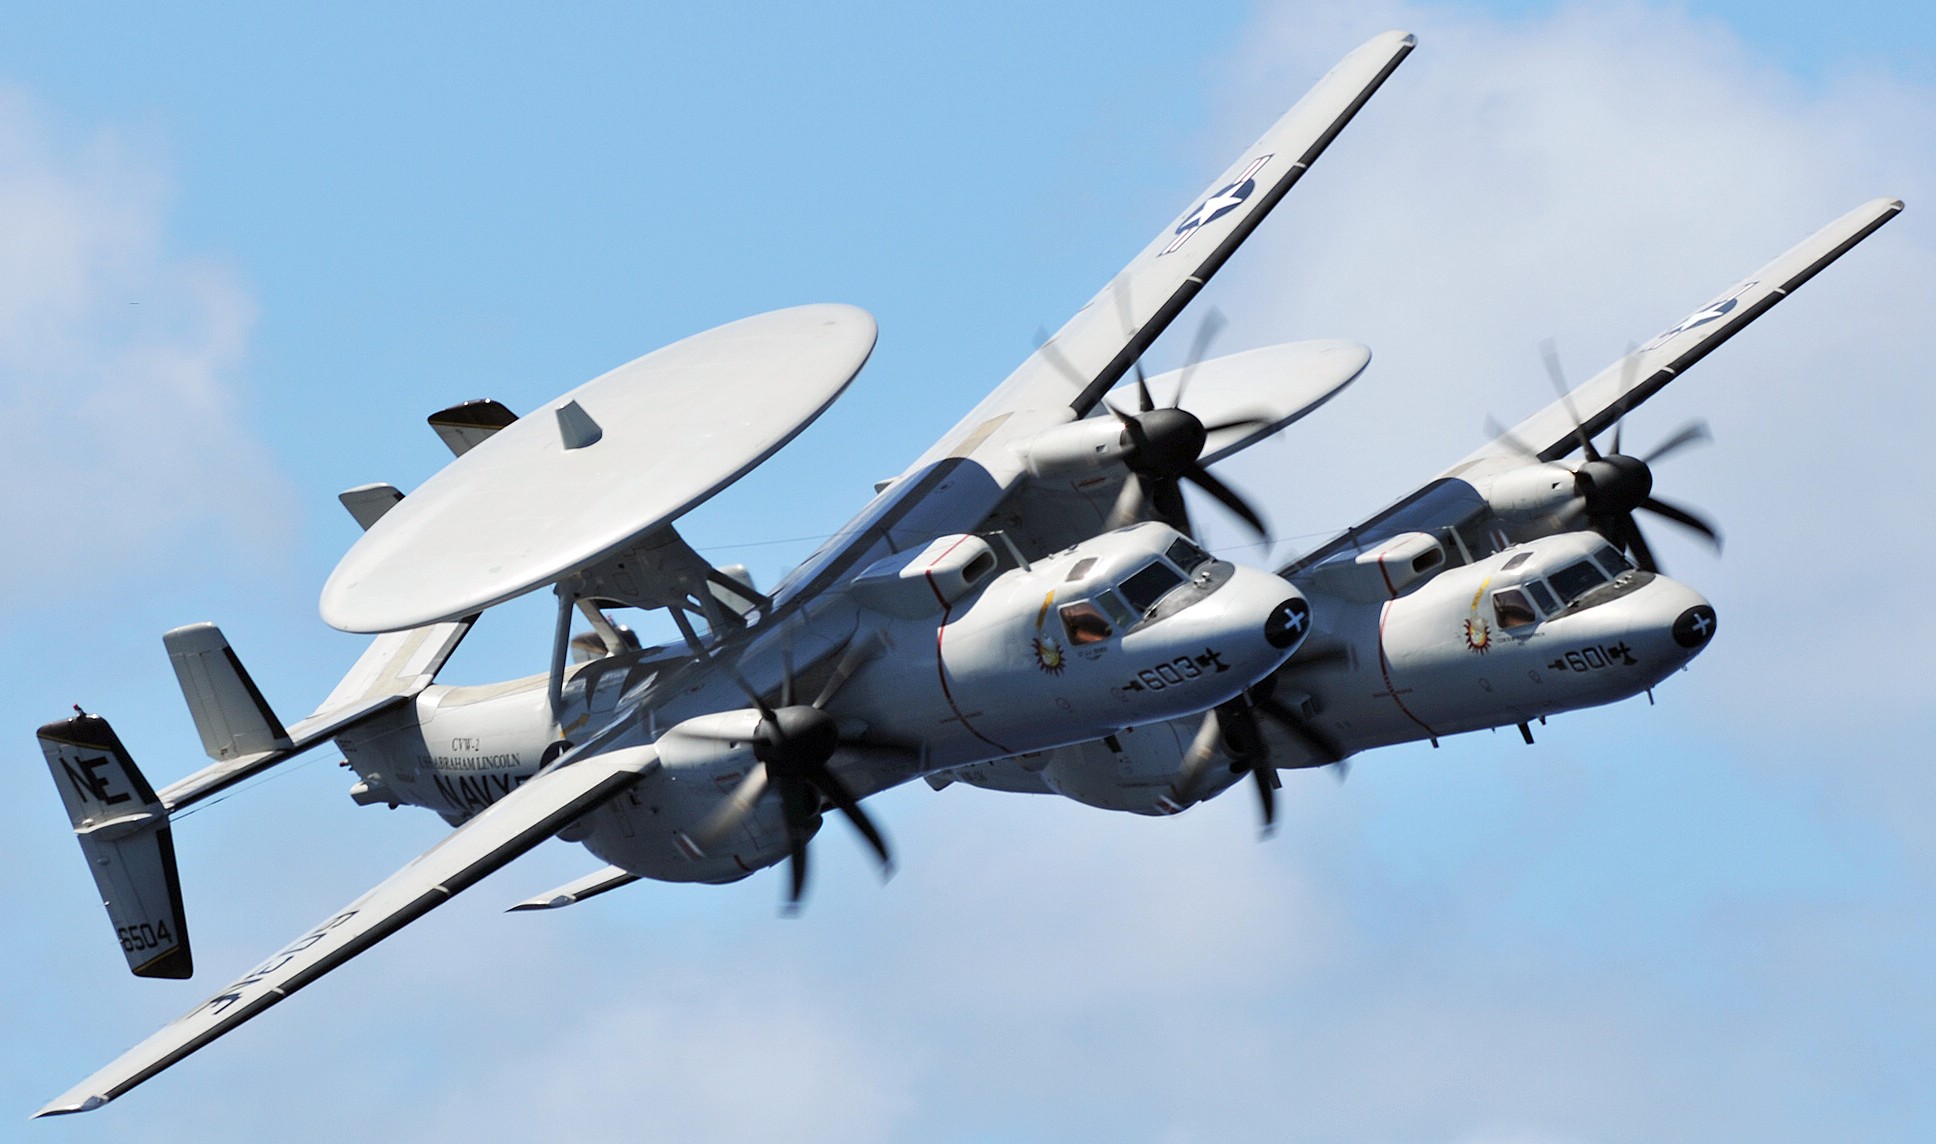 vaw-116 sun kings airborne command control squadron carrier early warning cvw-2 uss abraham lincoln cvn-72 17